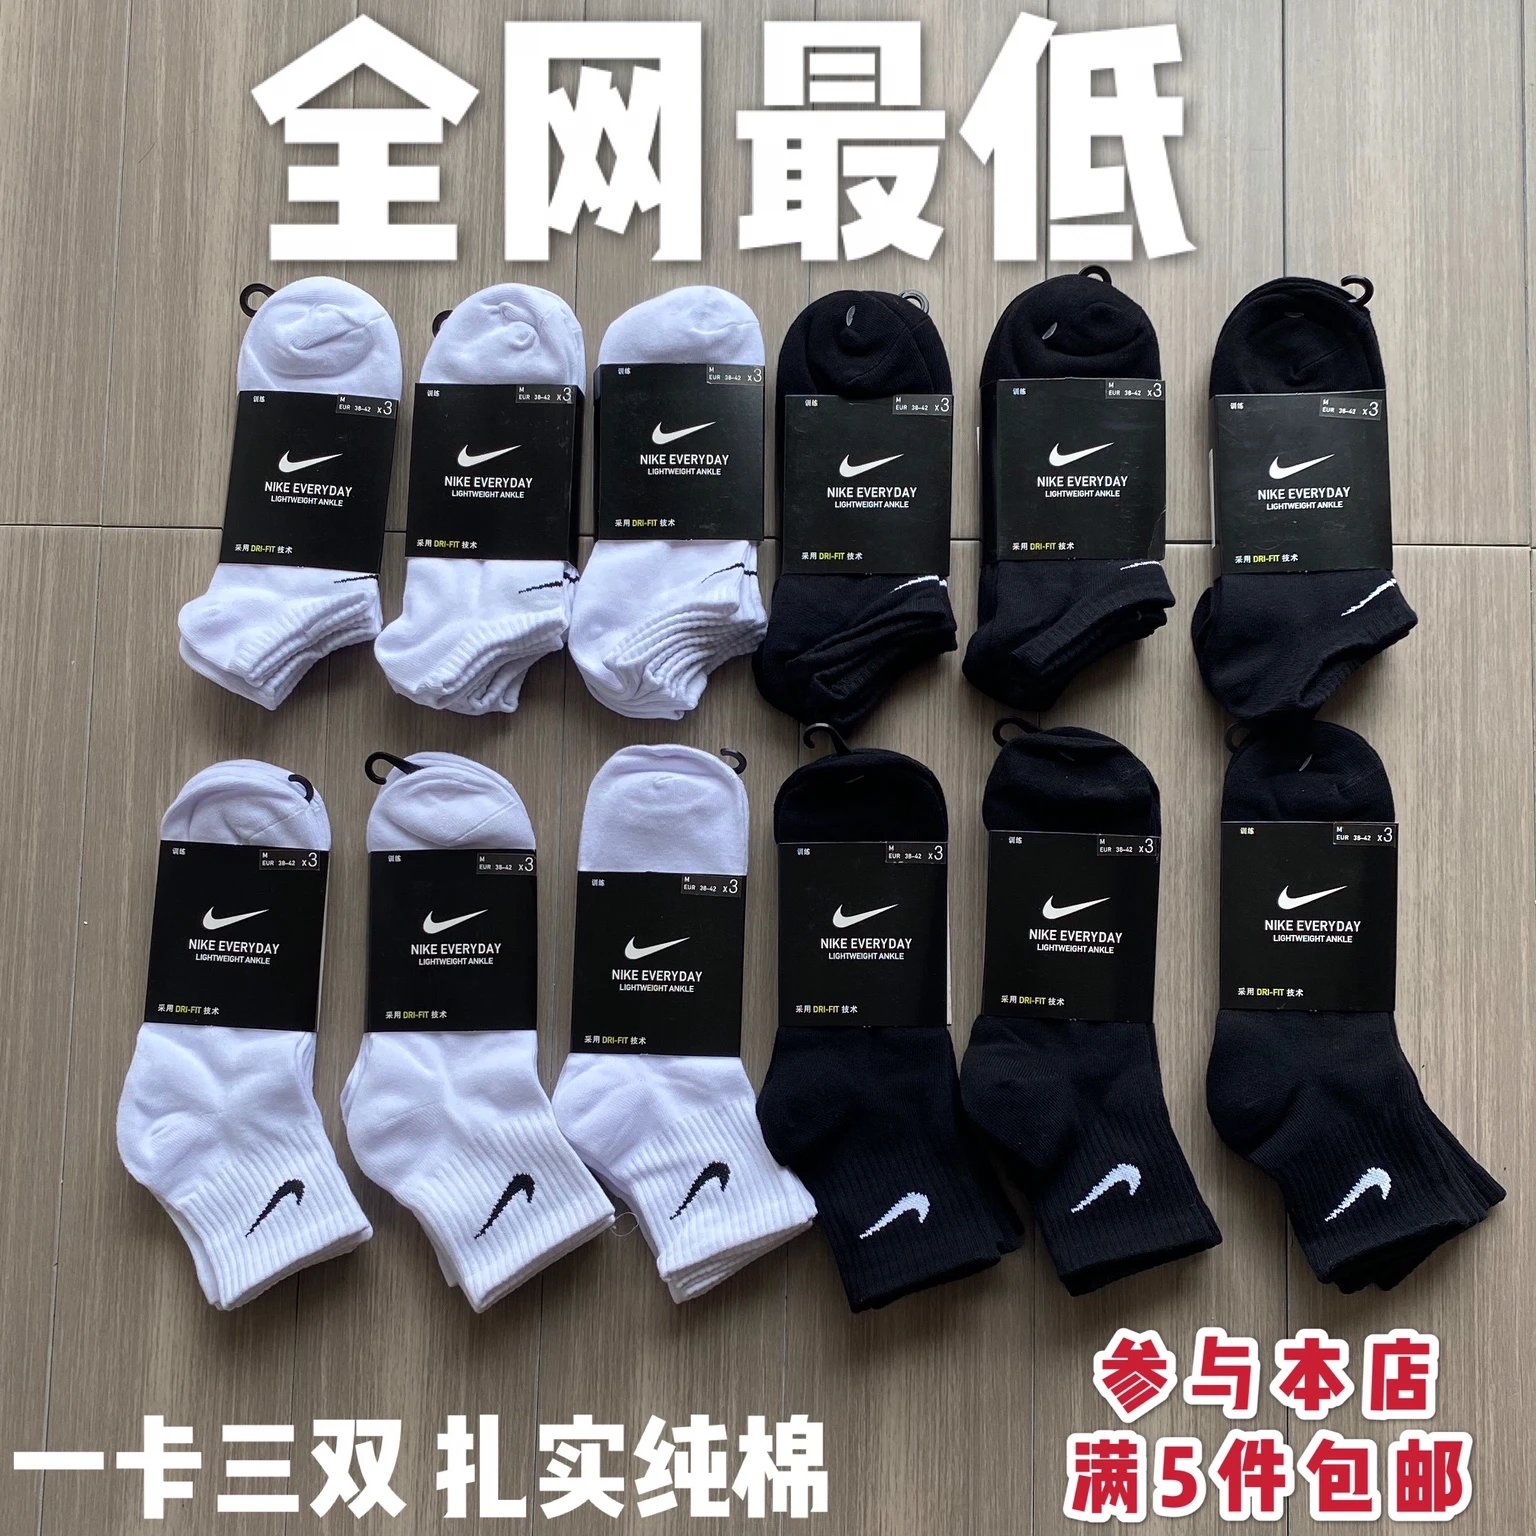 Item Thumbnail for The whole network is drunk and low | One card, three pairs of NK cabinets, the original single men’s and women’s sports socks, boat socks, four seasons, all-match classic cotton socks